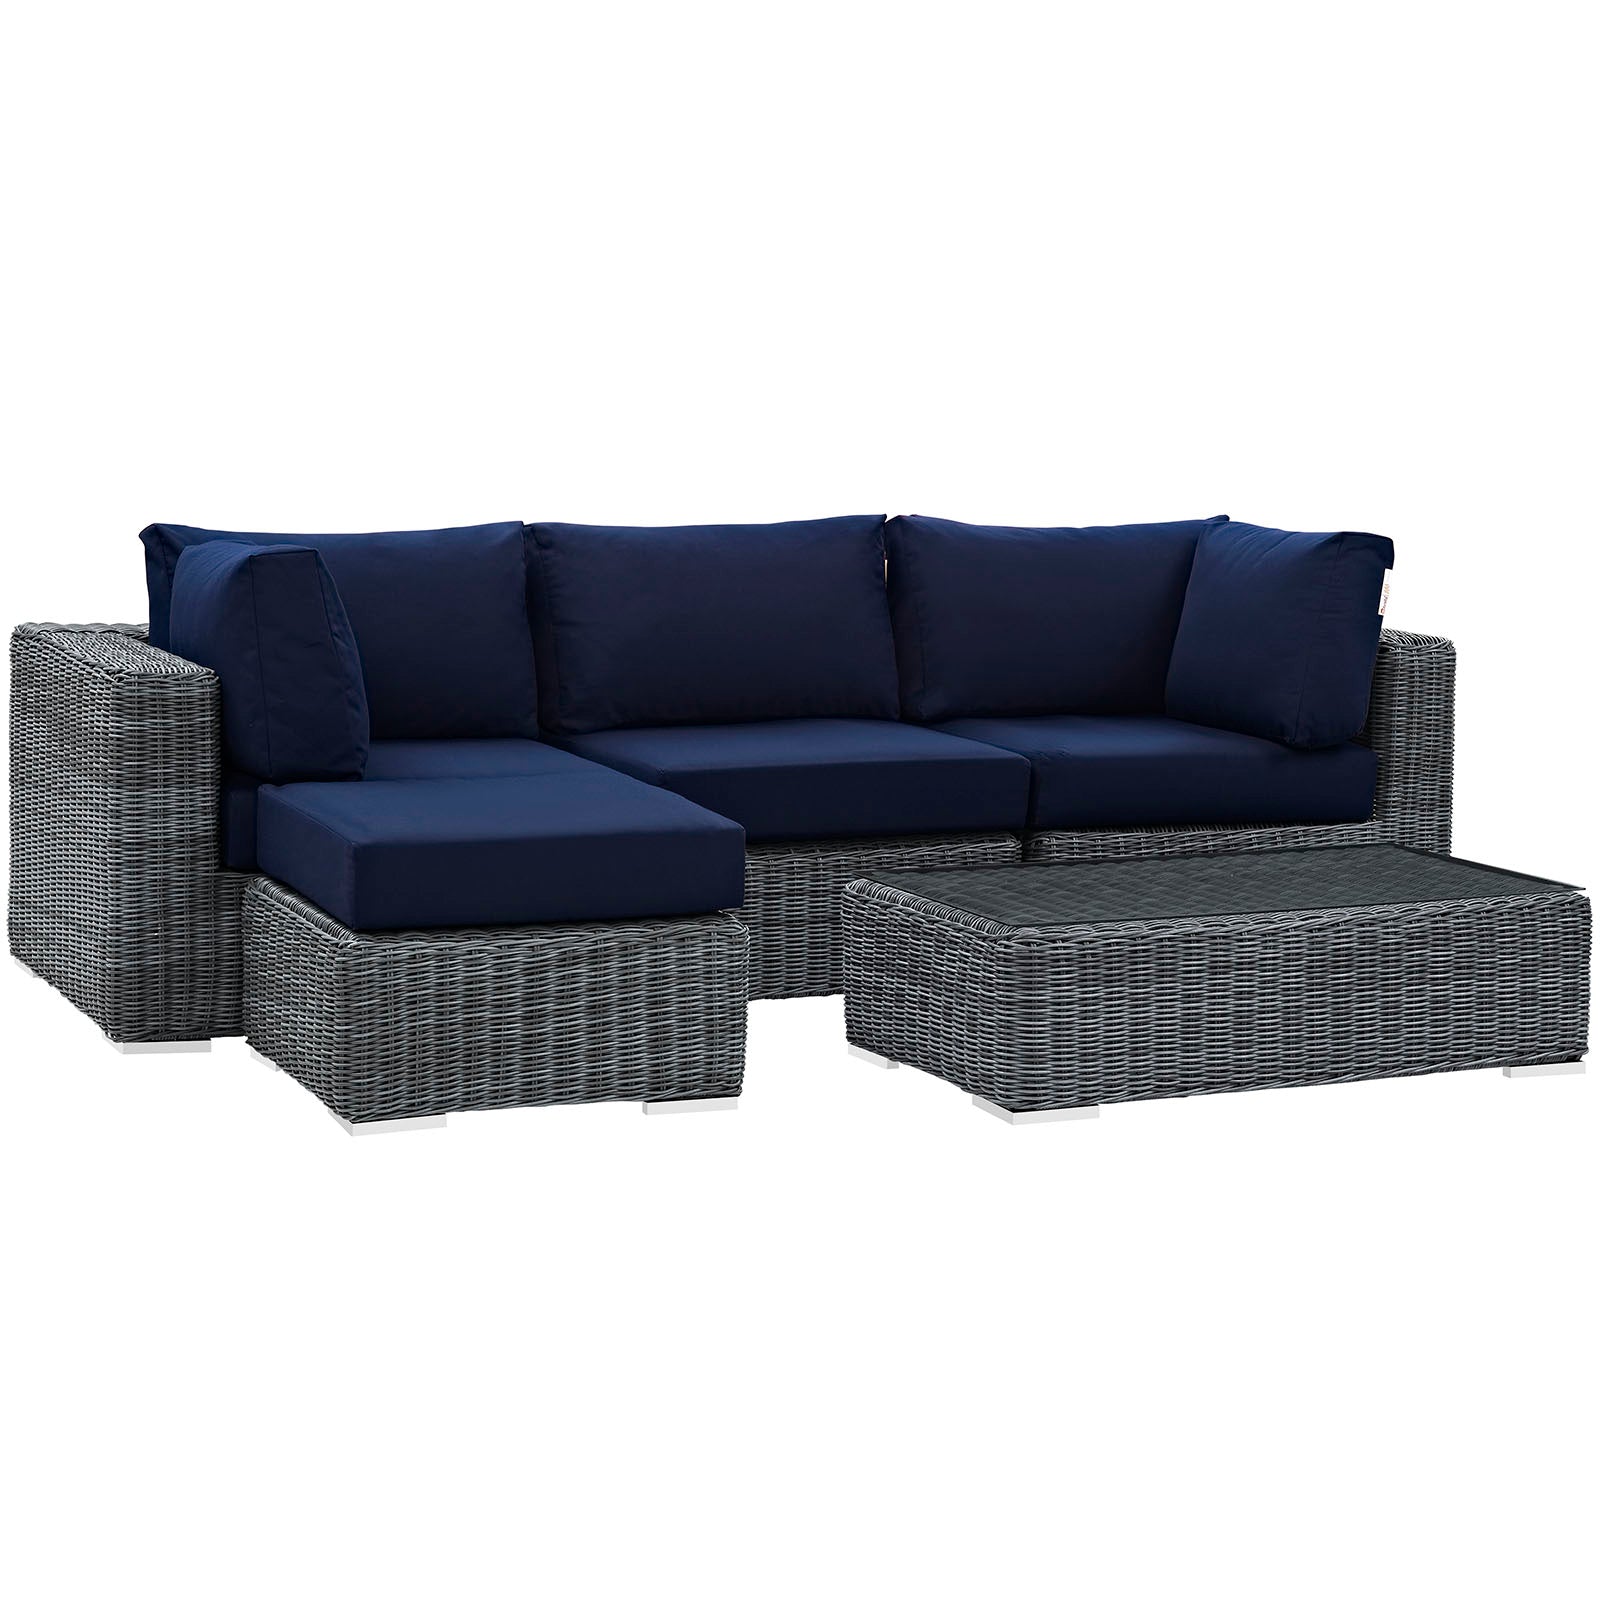 Summon 5 Piece Outdoor Patio Sunbrella® Sectional Set-Outdoor Sectional-Modway-Wall2Wall Furnishings